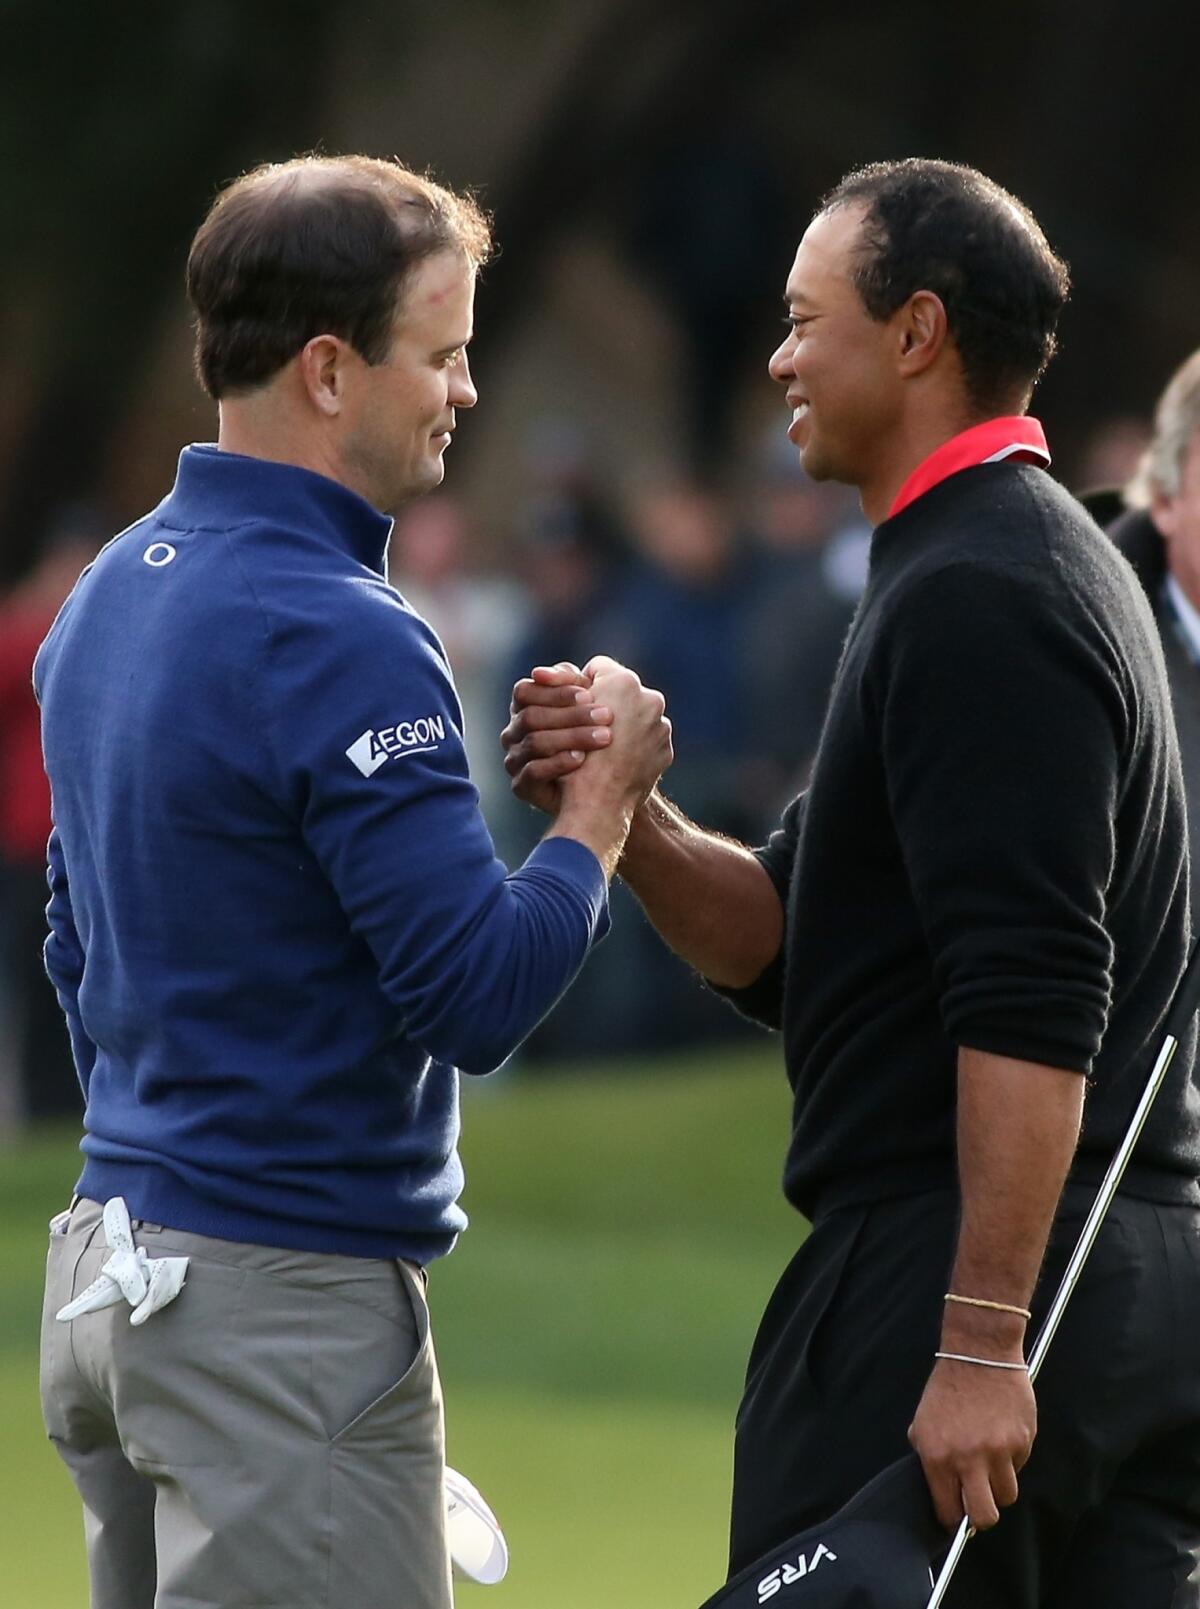 Zach Johnson, left, is congratulated by Tiger Woods after beating Woods on a playoff hole to win the Northwestern Mutual World Challenge at Sherwood Country Club in Thousand Oaks on Sunday.